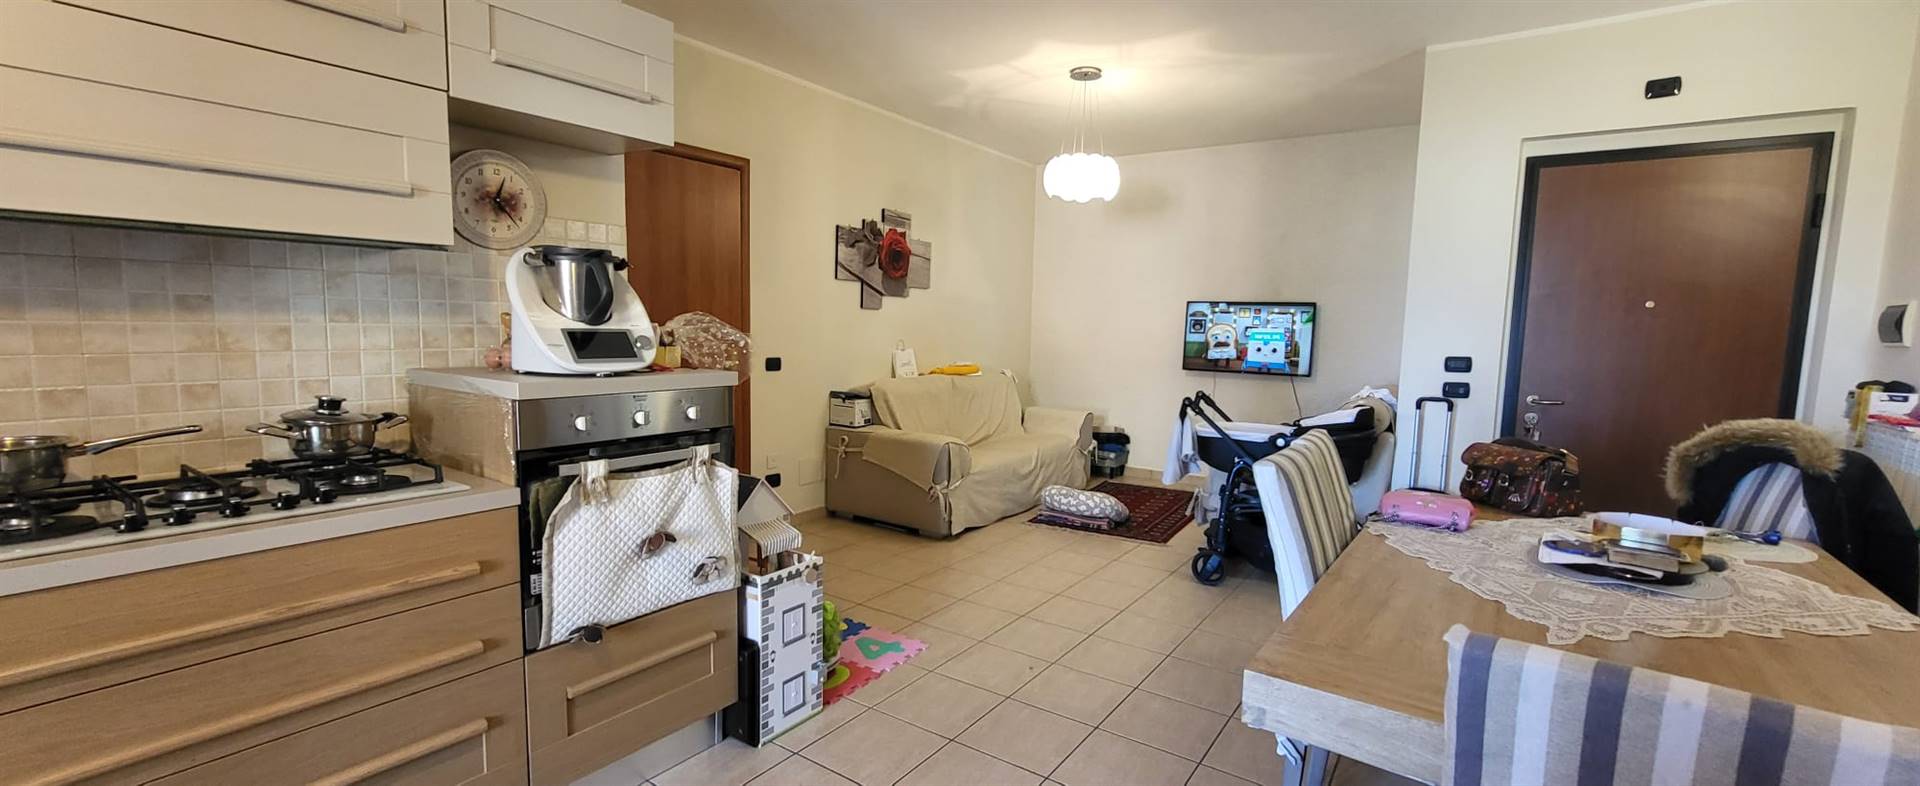 STAZIONE DI MONTALTO, MONTALTO UFFUGO, Apartment for rent of 91 Sq. mt., Excellent Condition, Energetic class: G, composed by: 4 Rooms, Show cooking, 